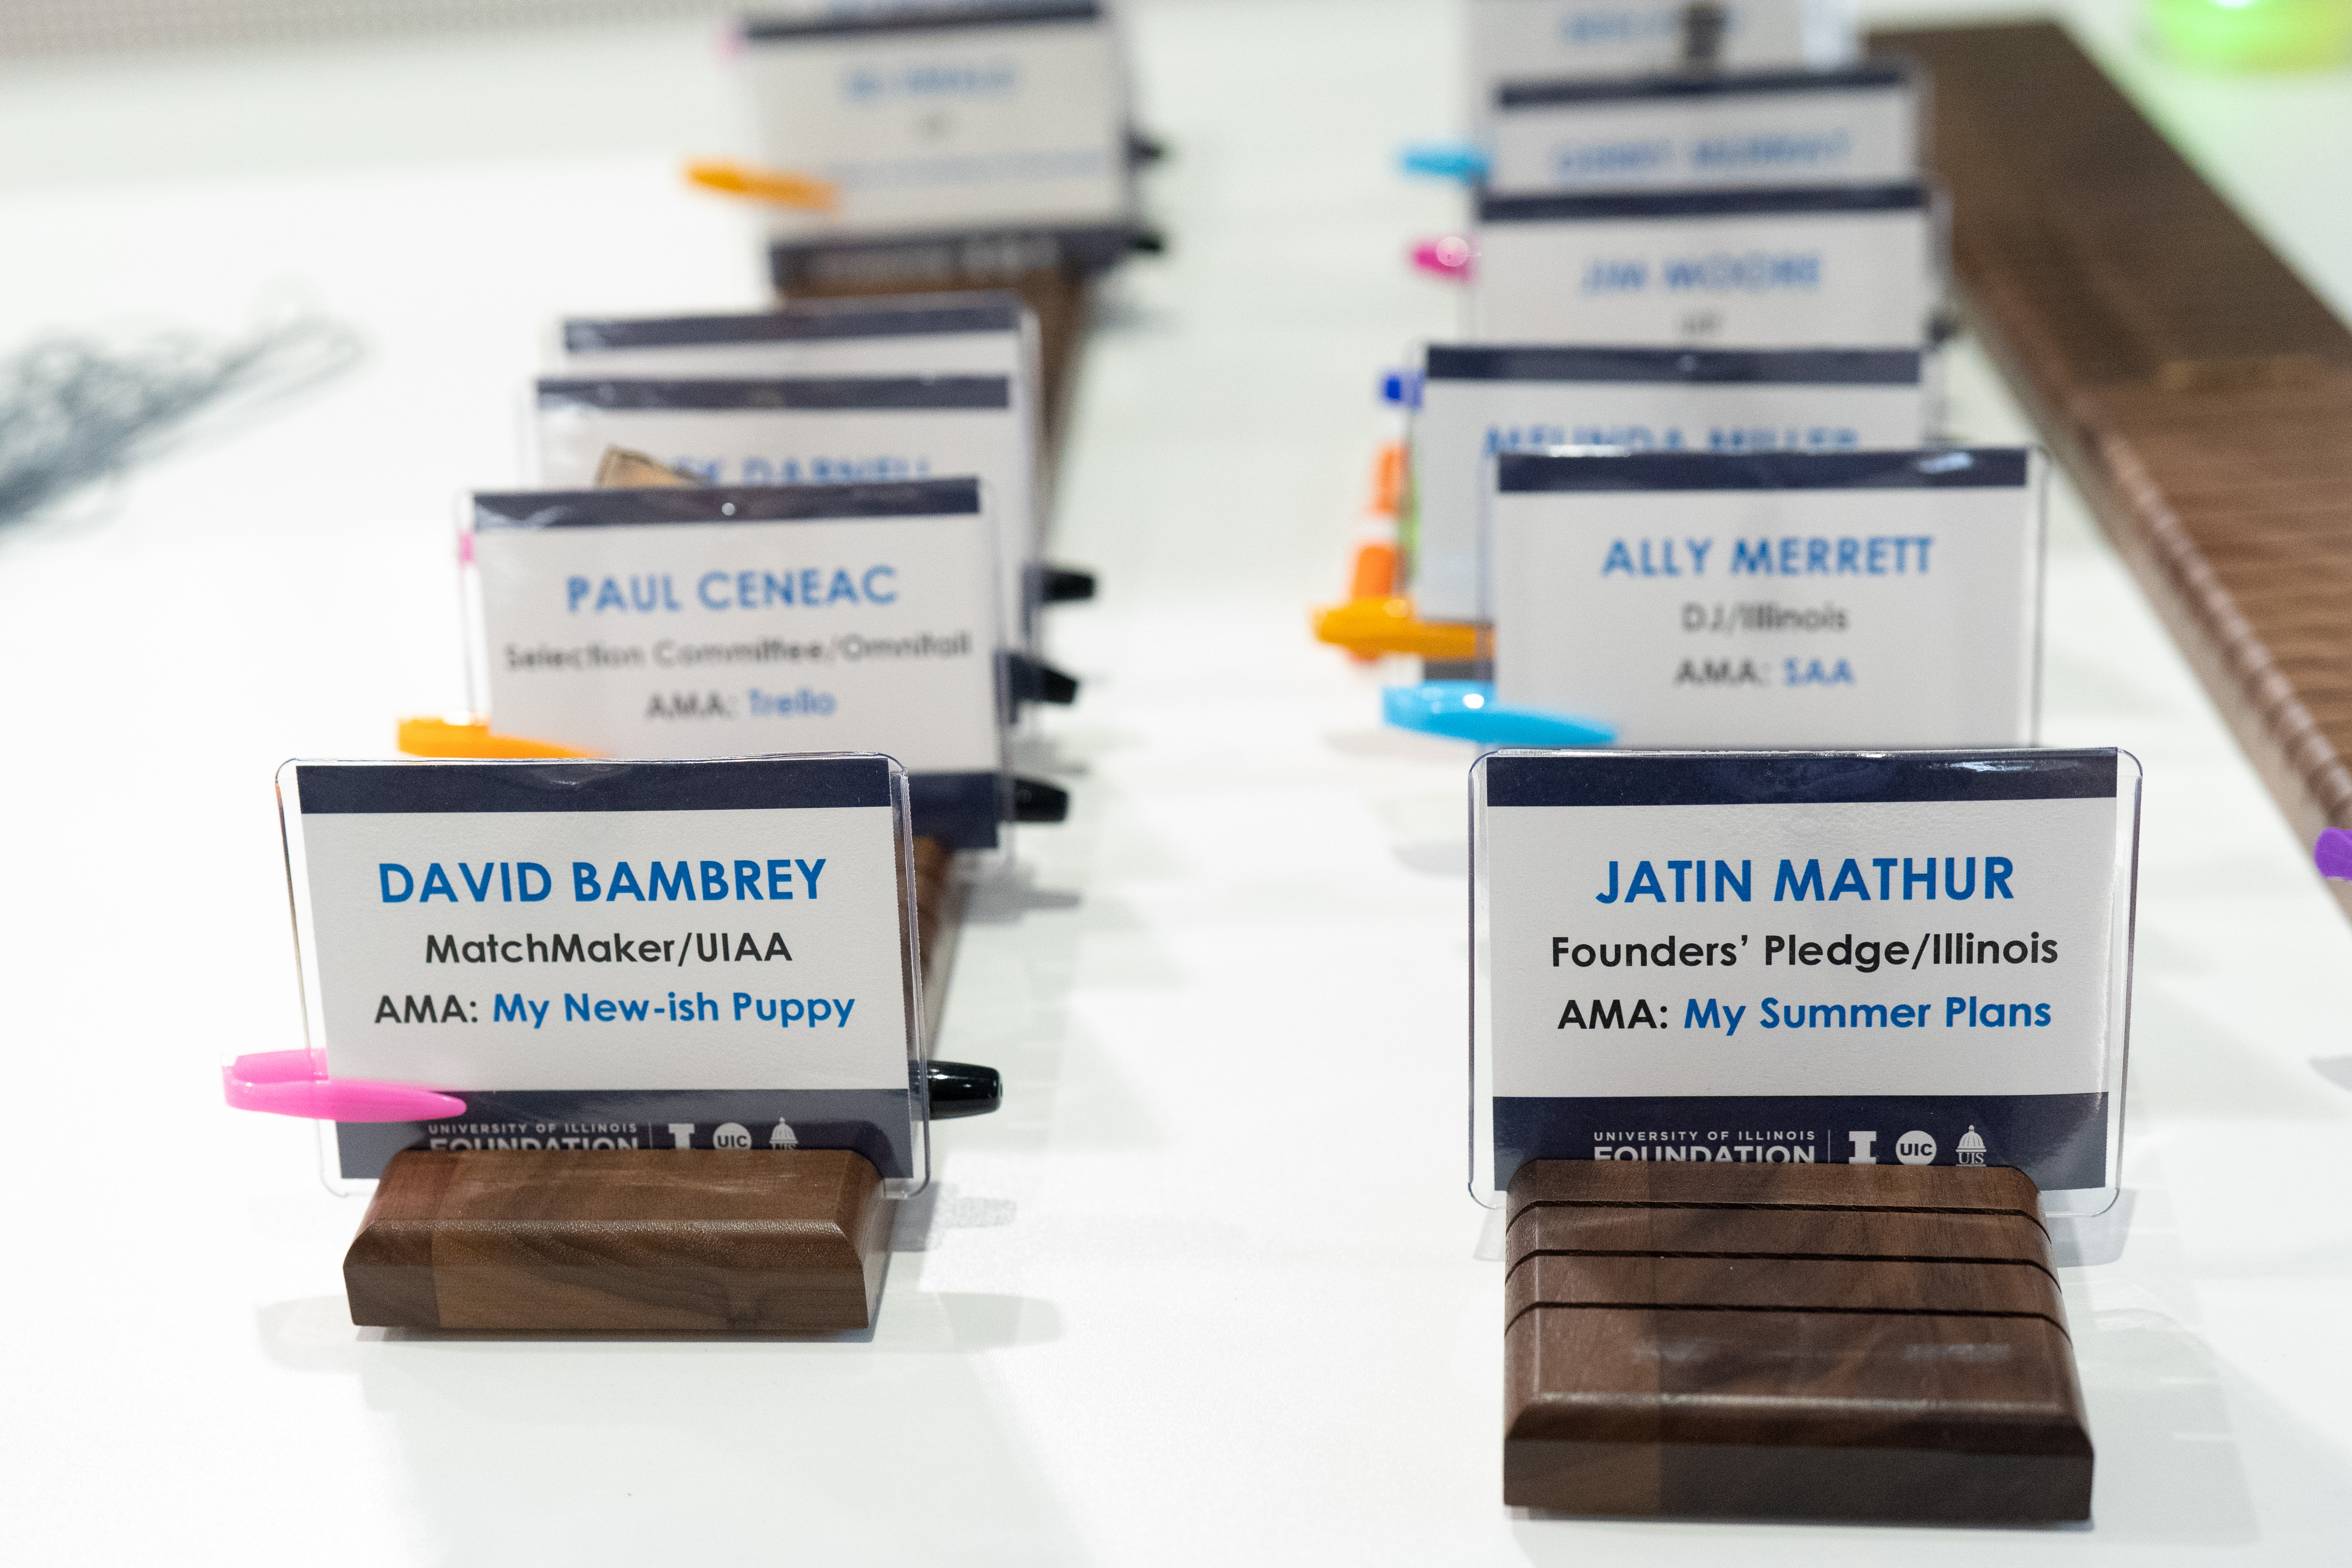 Photo of name badges at check-in desk with Ask Me About prompt and dry erase markers